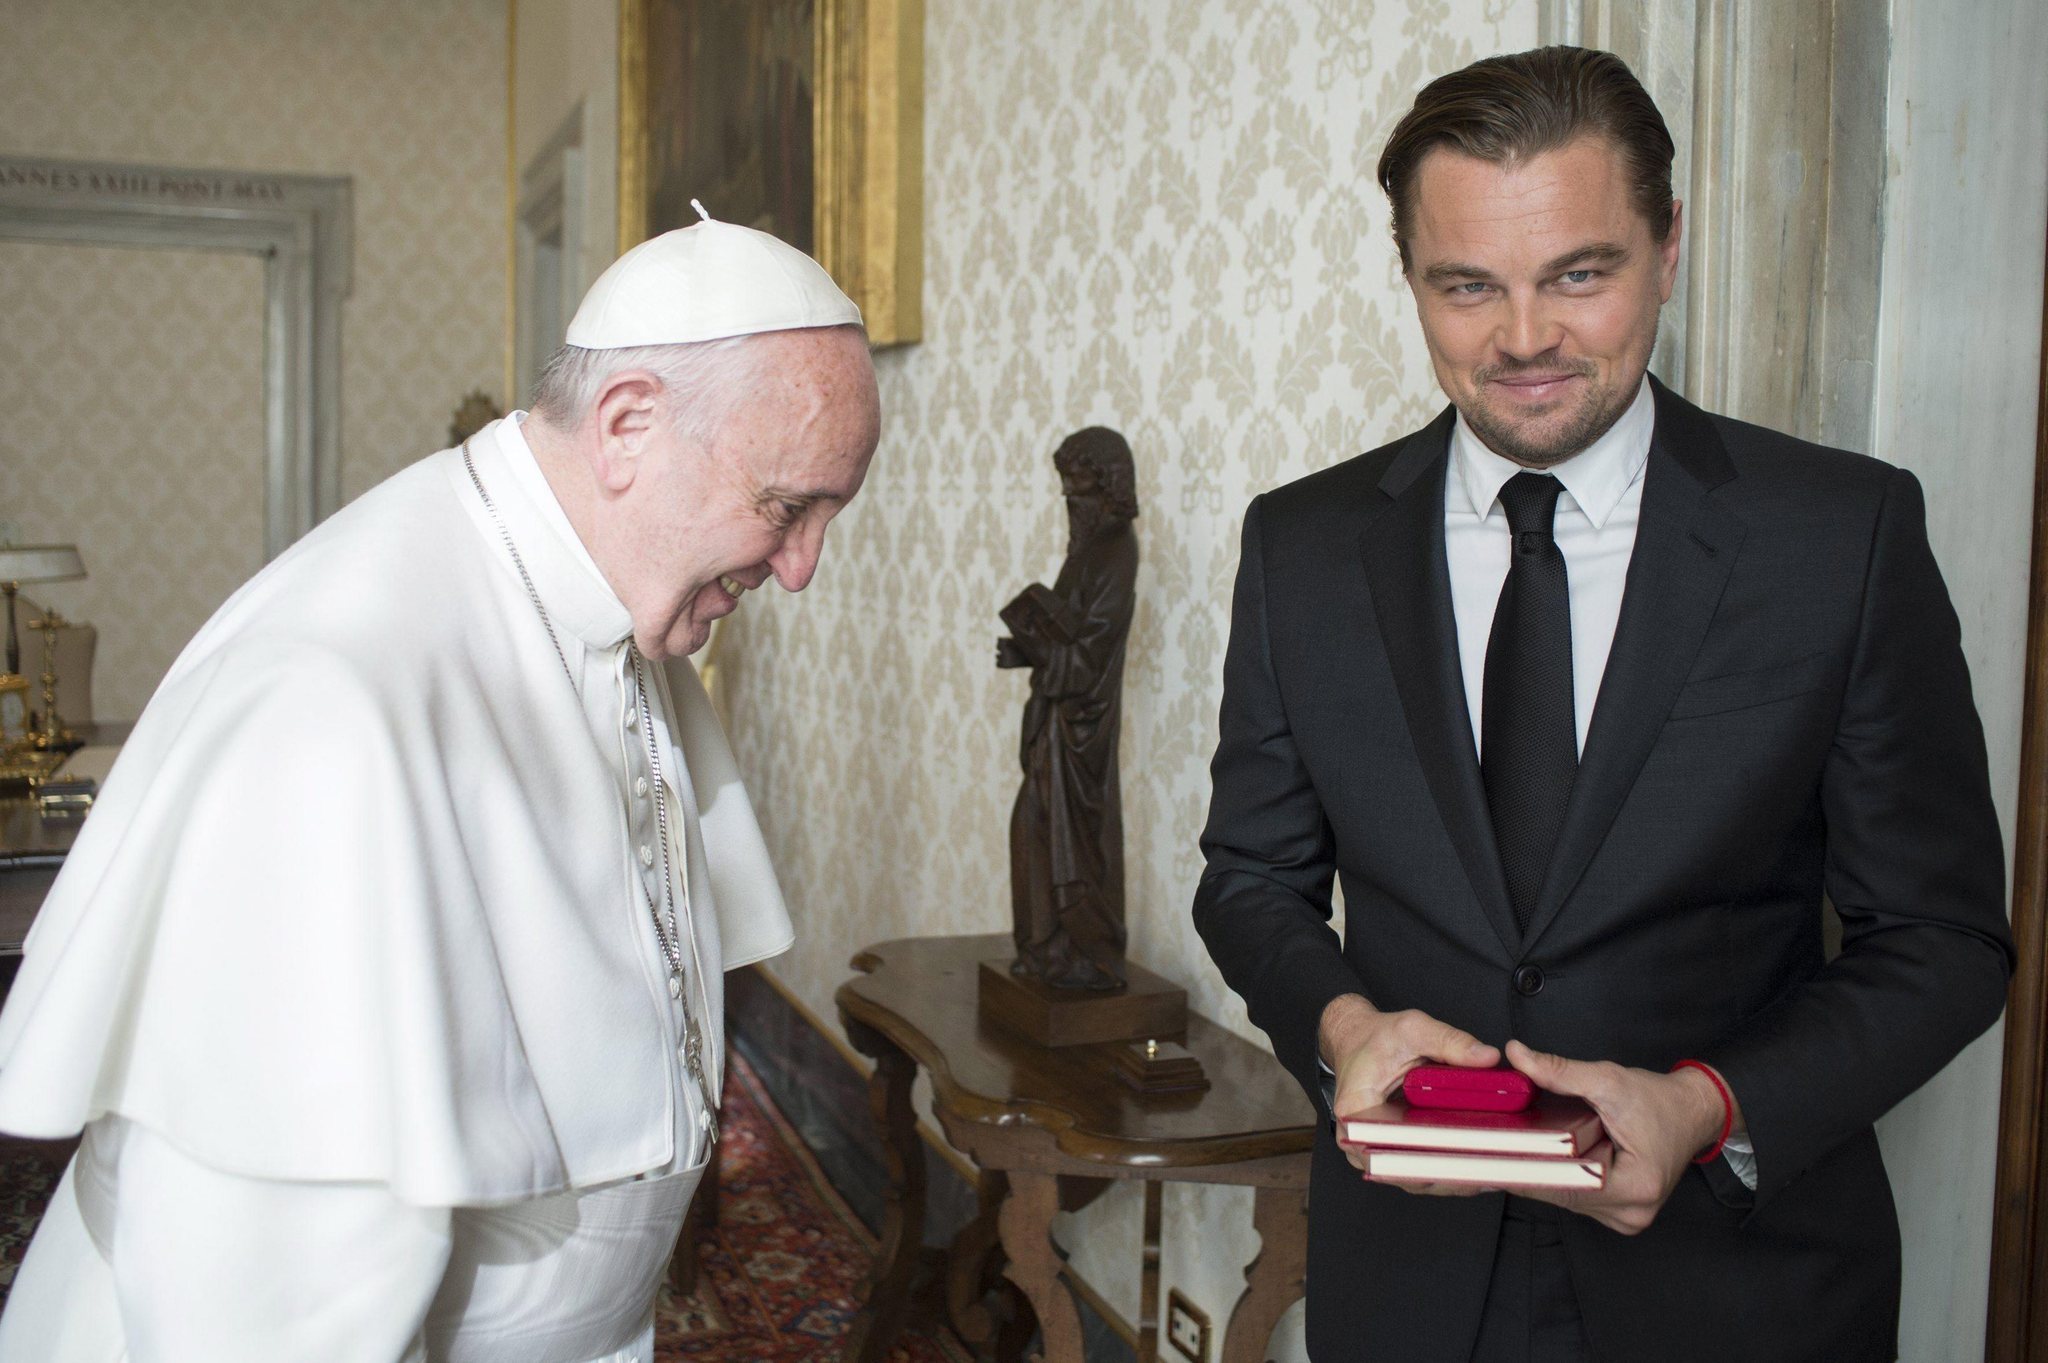 Leonardo DiCaprio met the Pope earlier in January to discuss climate change (Credit: EPA)